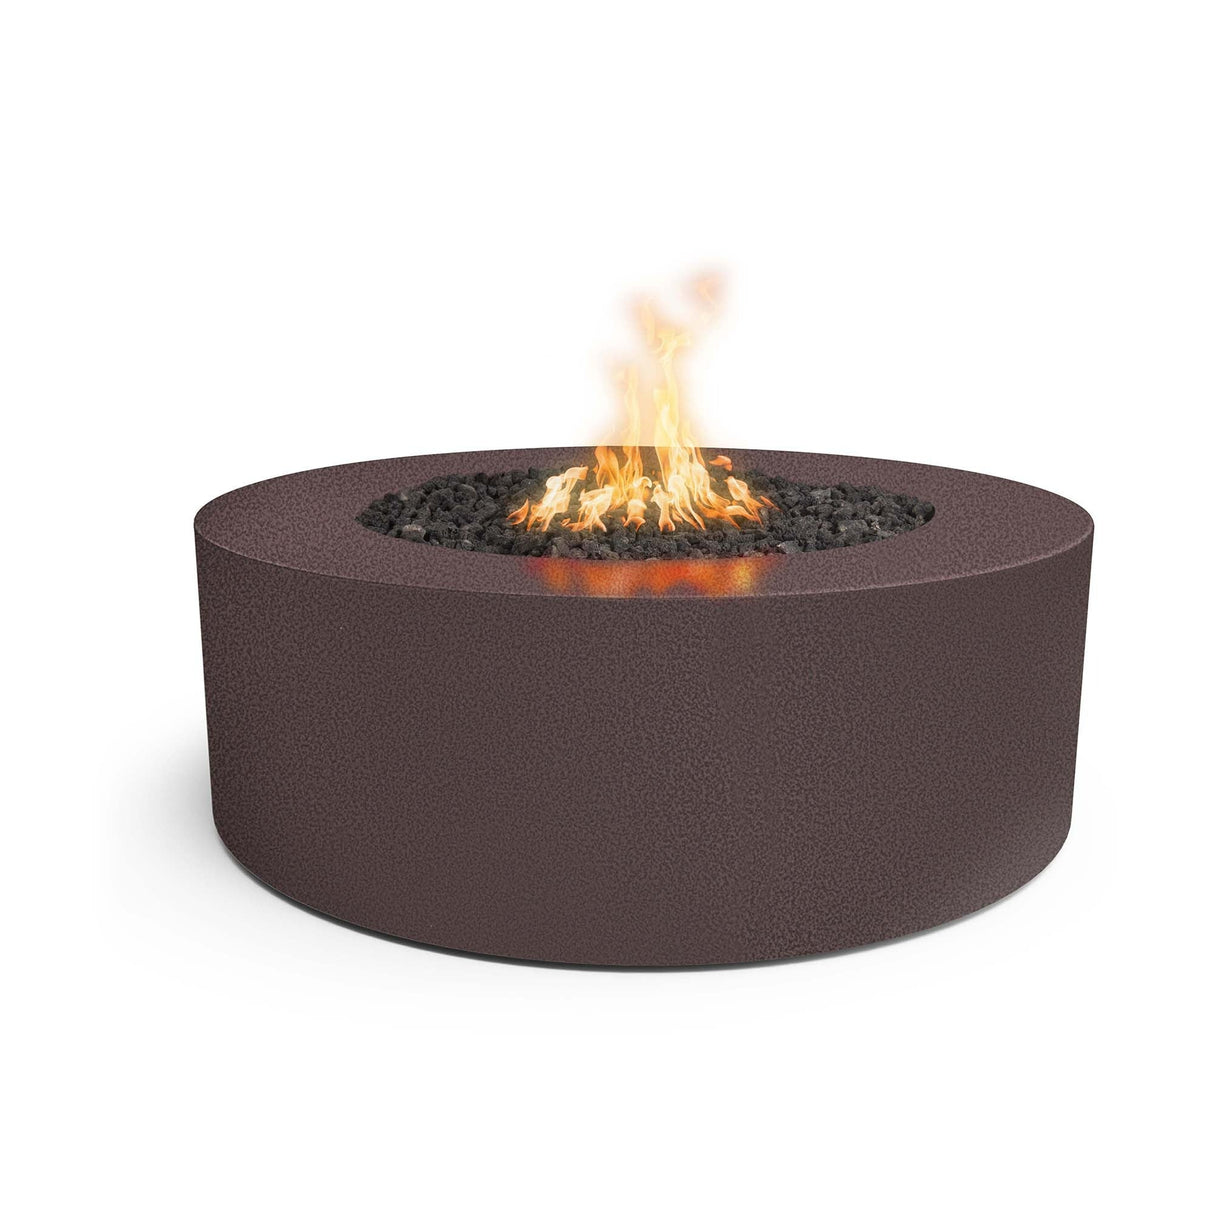 The Outdoor Plus Unity Powder Coat Steel Fire Pit Fire Table